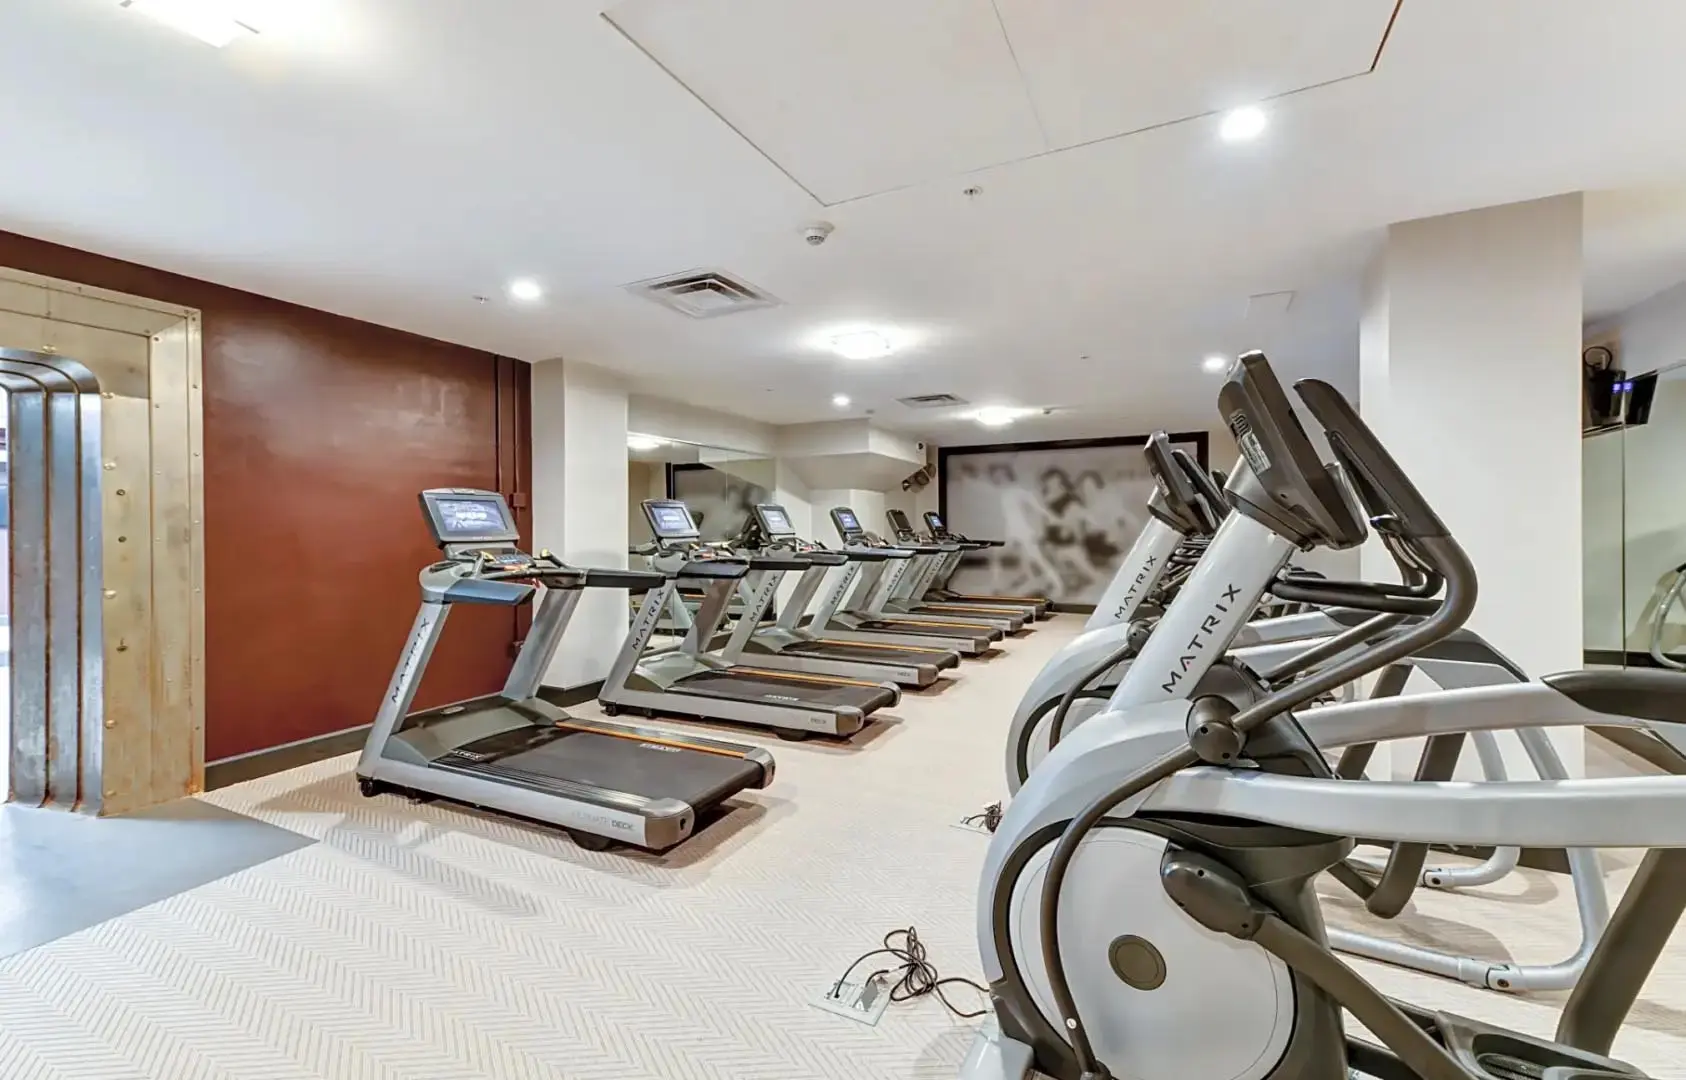 A fitness center with treadmills and elliptical machines.